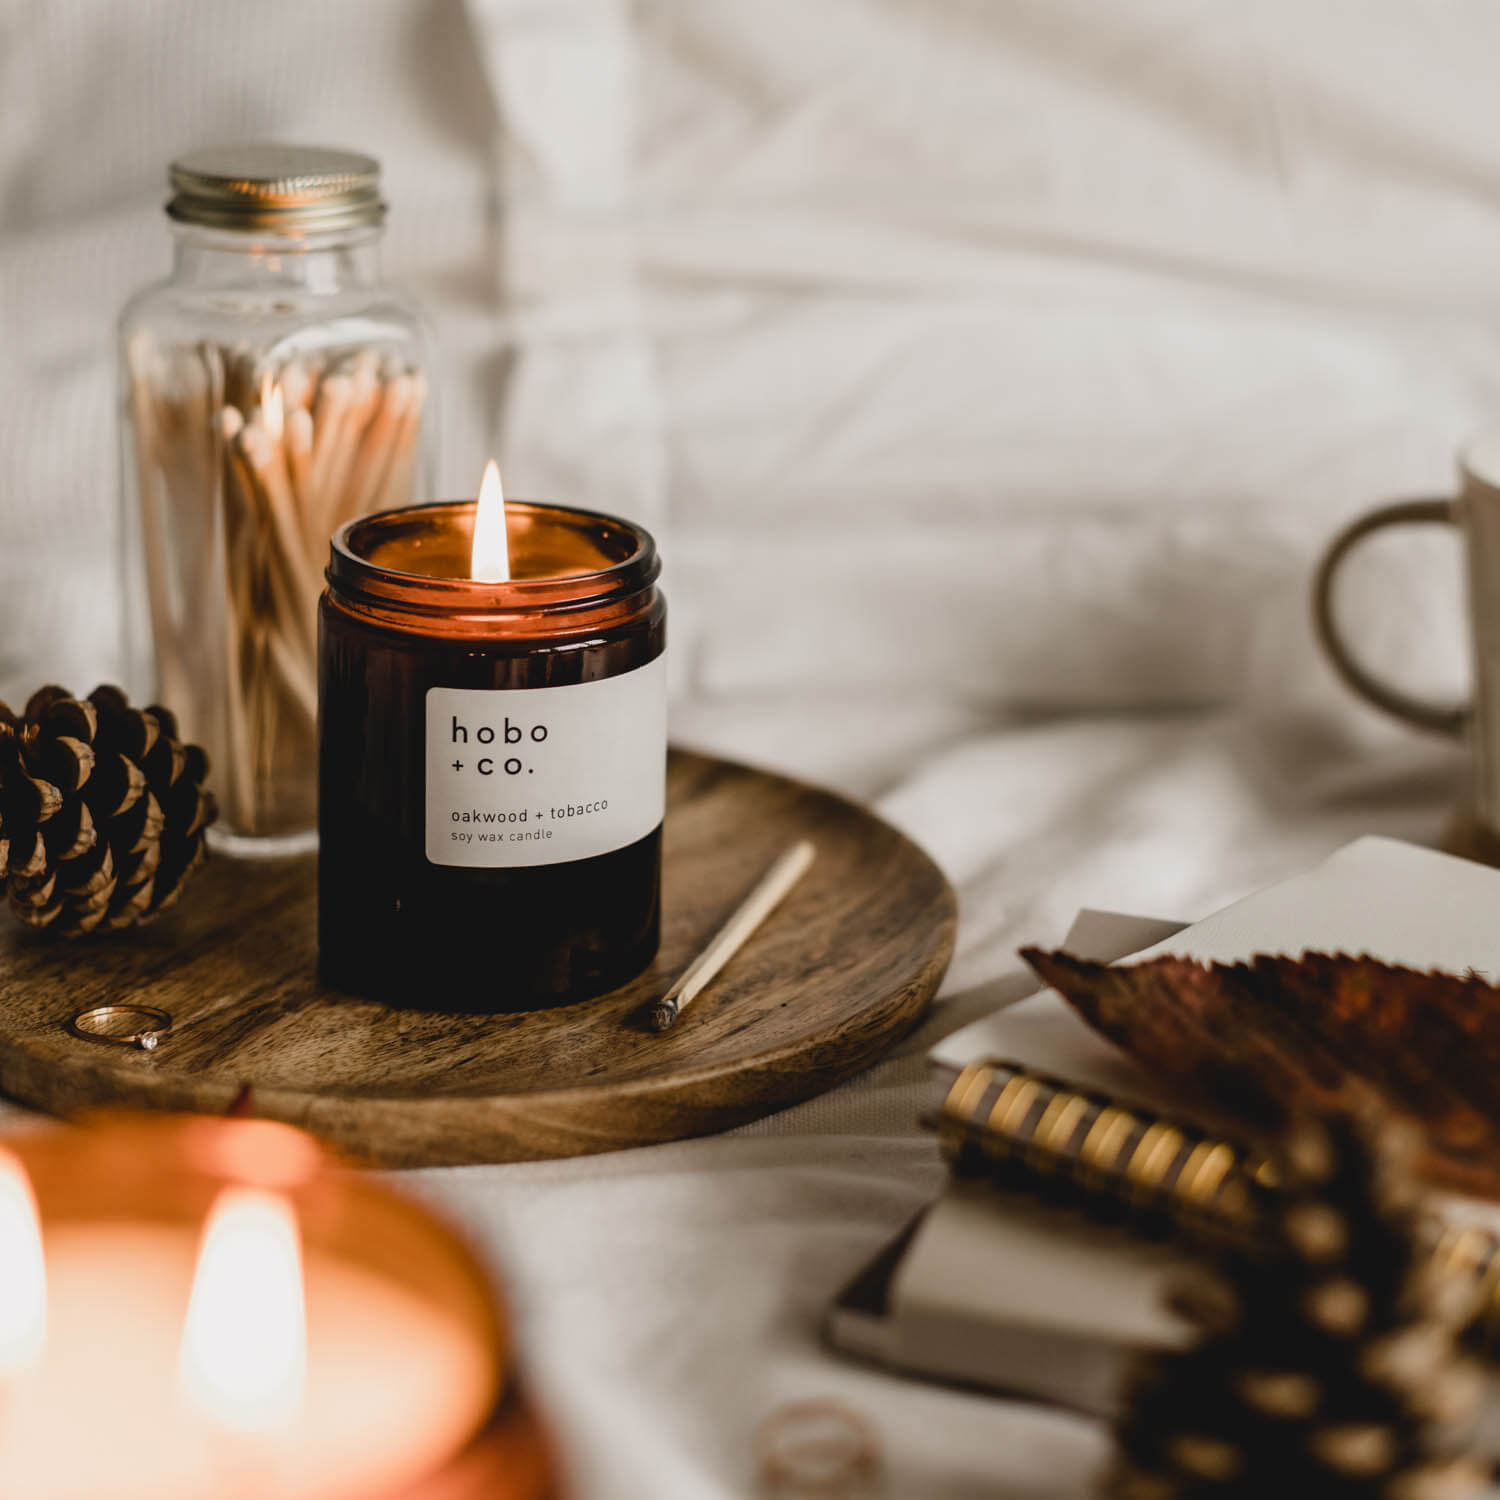 Hobo + Co. Oakwood & Tobacco Scented Candle - Osmology Scented Candles & Home Fragrance